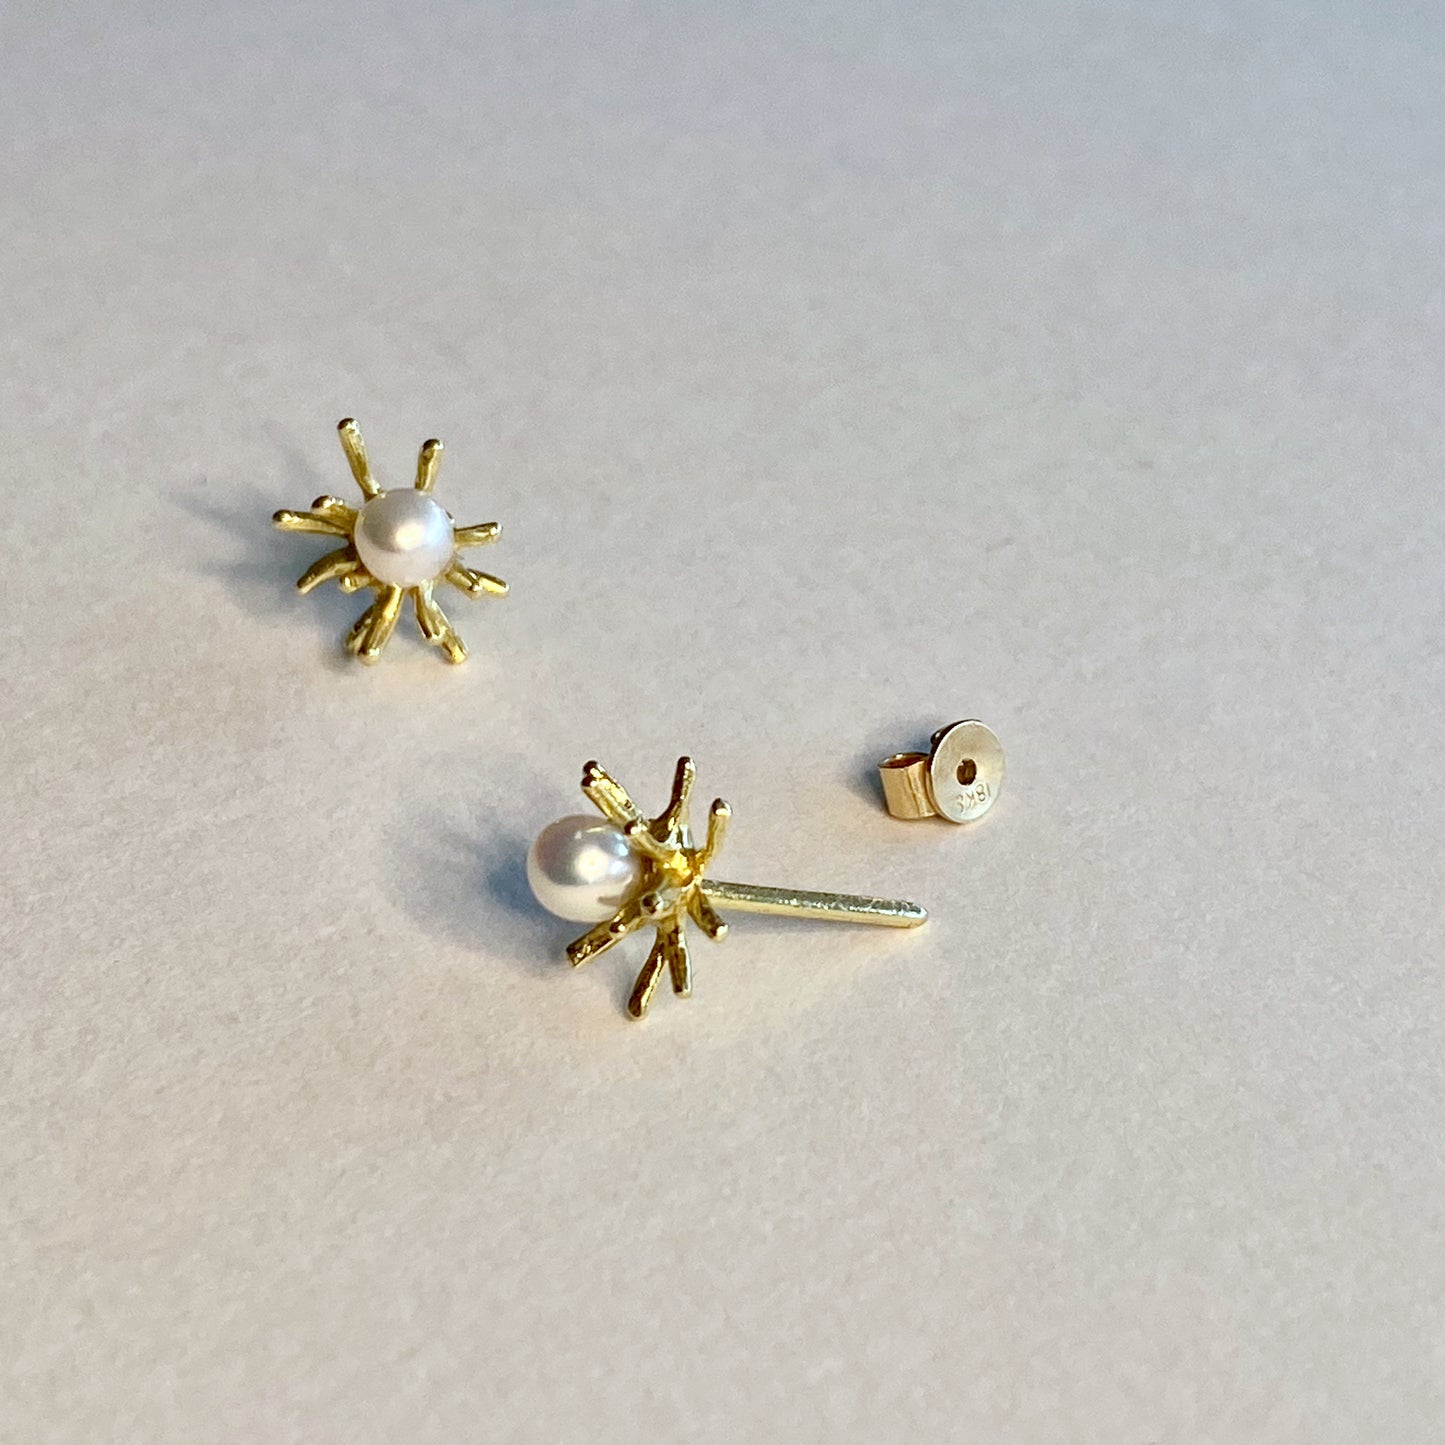 Sea Urchin earrings in solid 18 kt gold with natural pearls. Side view of the post and back.